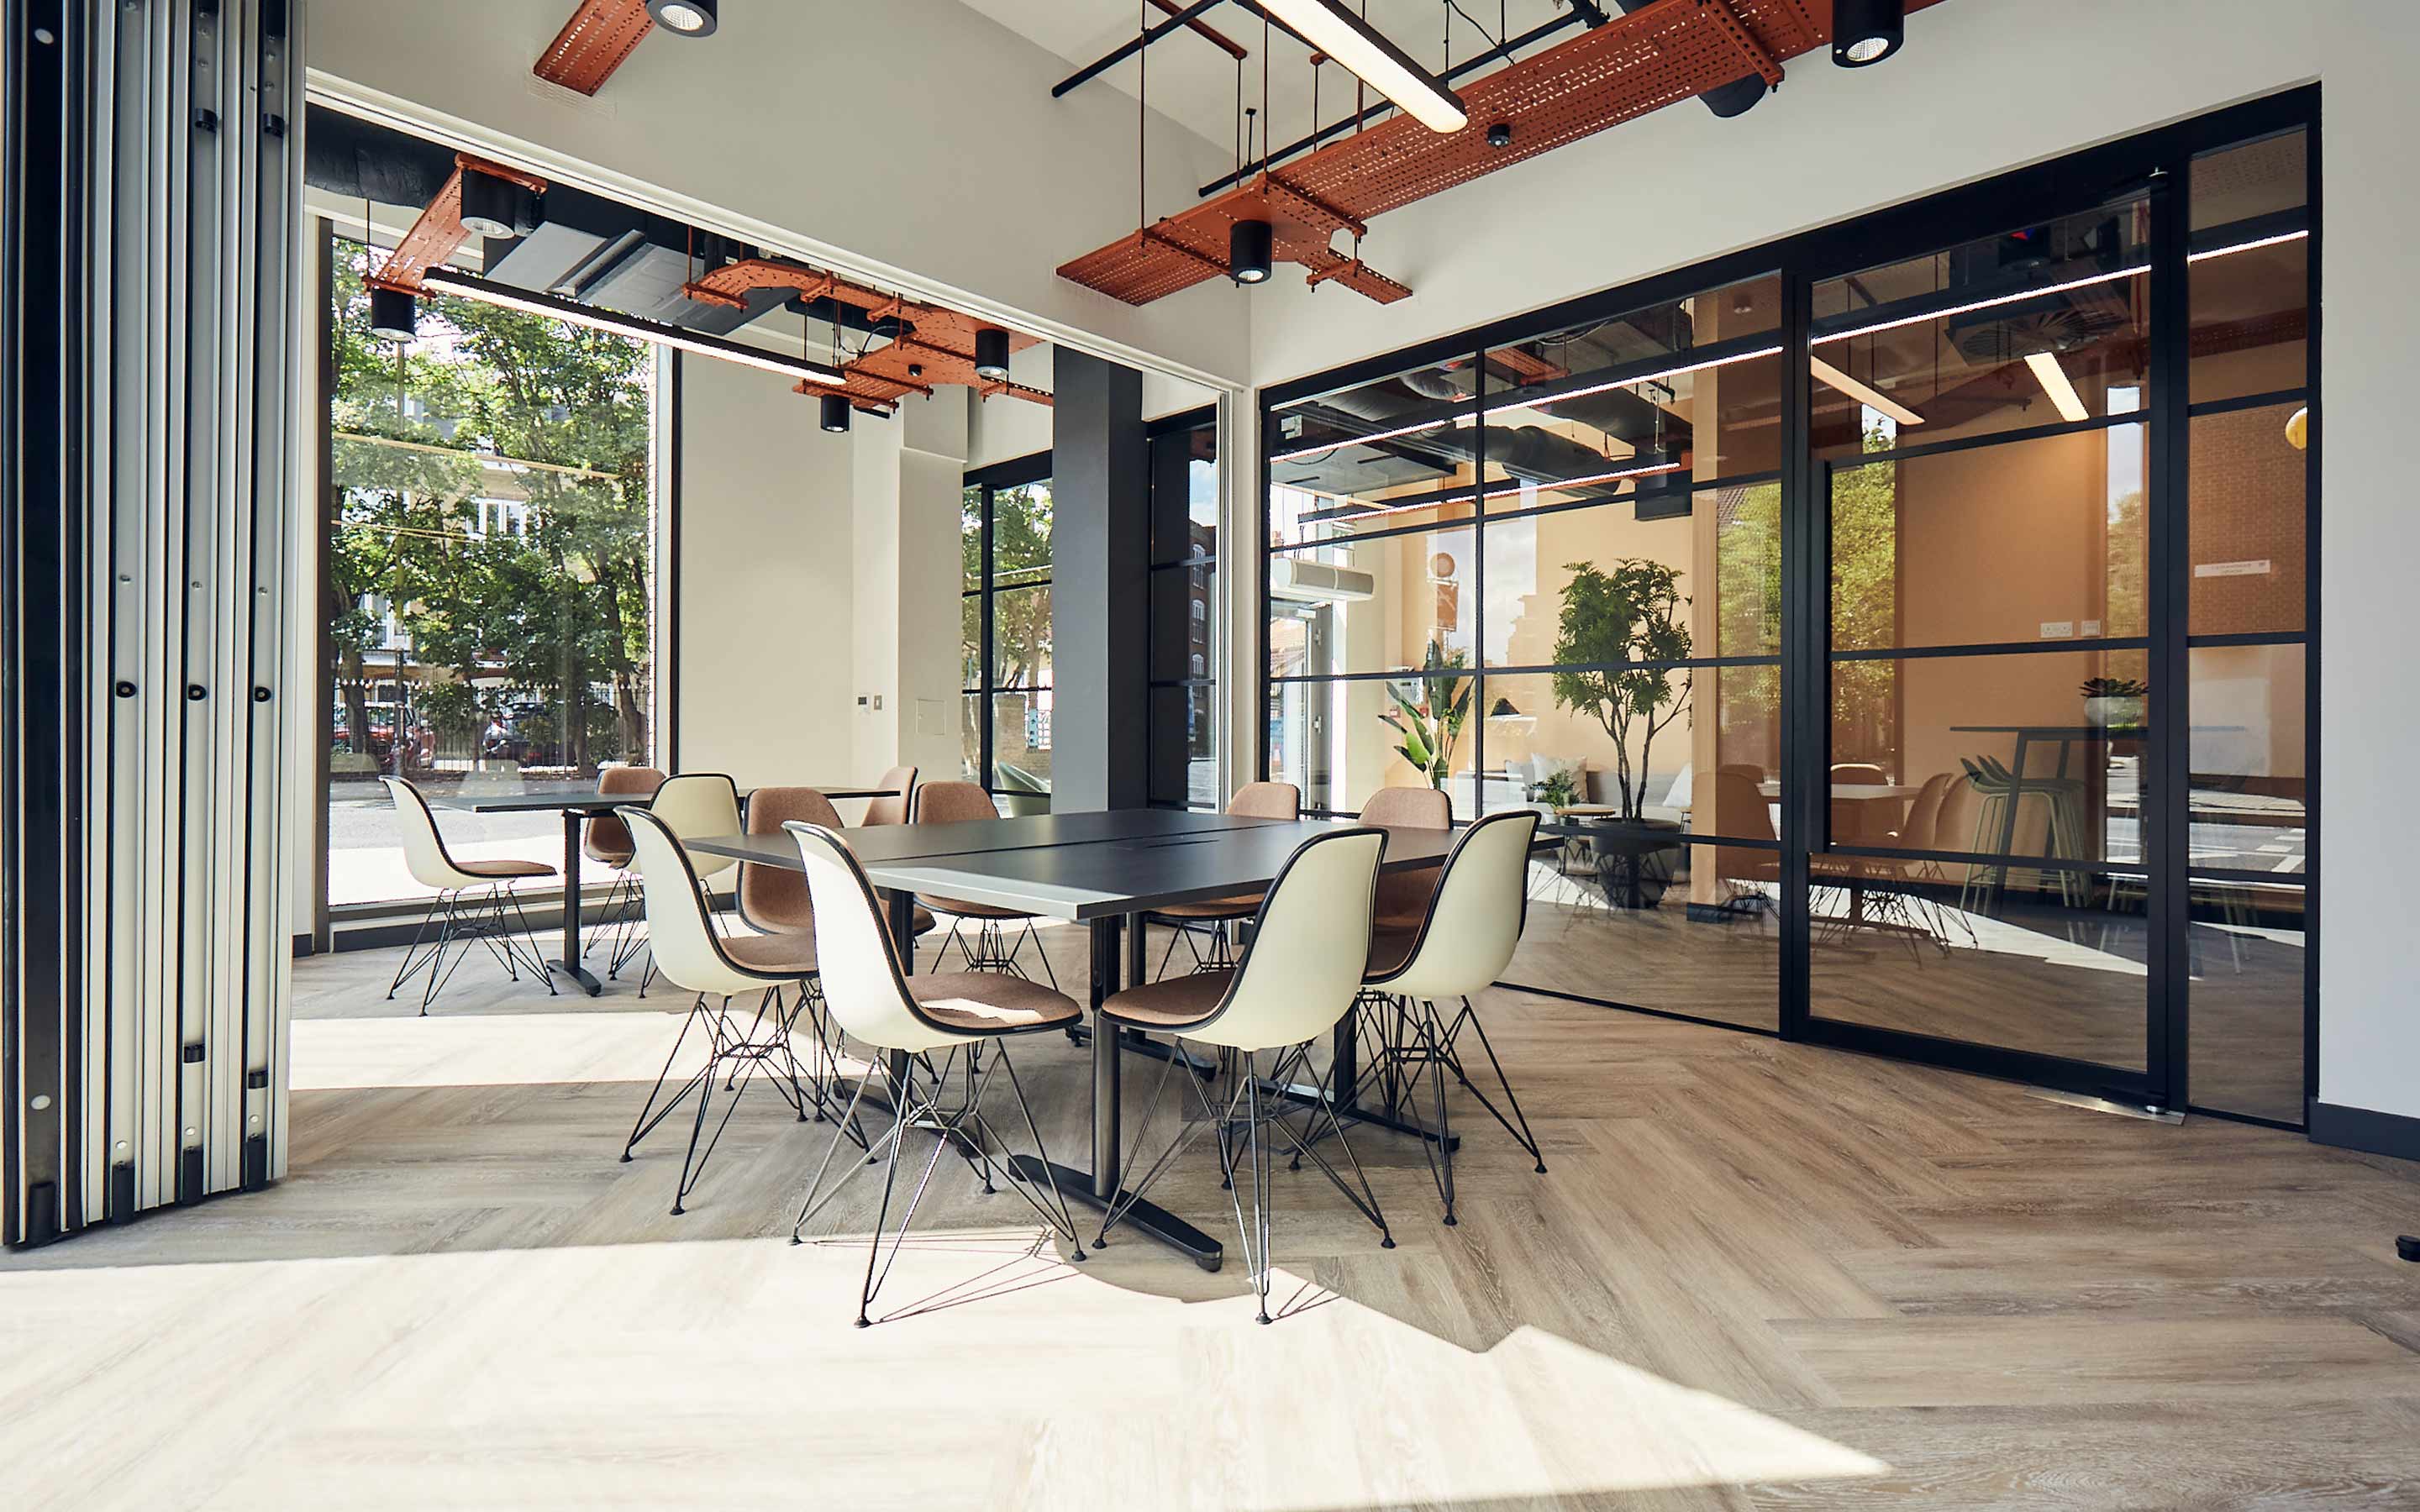 The image shows a sunny office interior, with glass meeting walls and cool tables and chairs